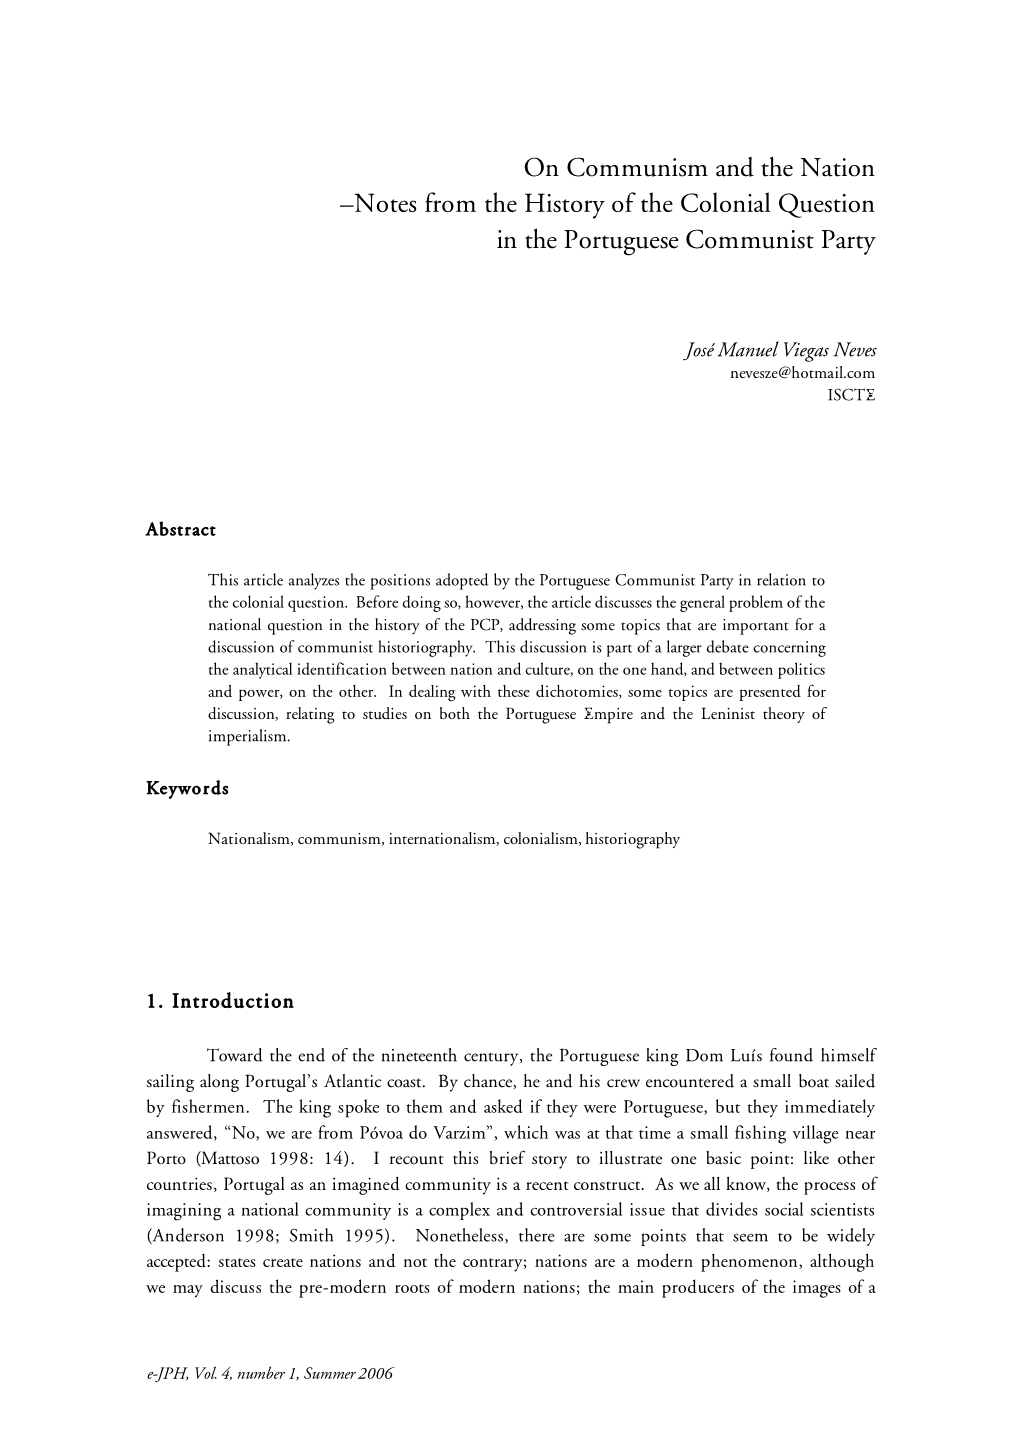 On Communism and the Nation –Notes from the History of the Colonial Question in the Portuguese Communist Party